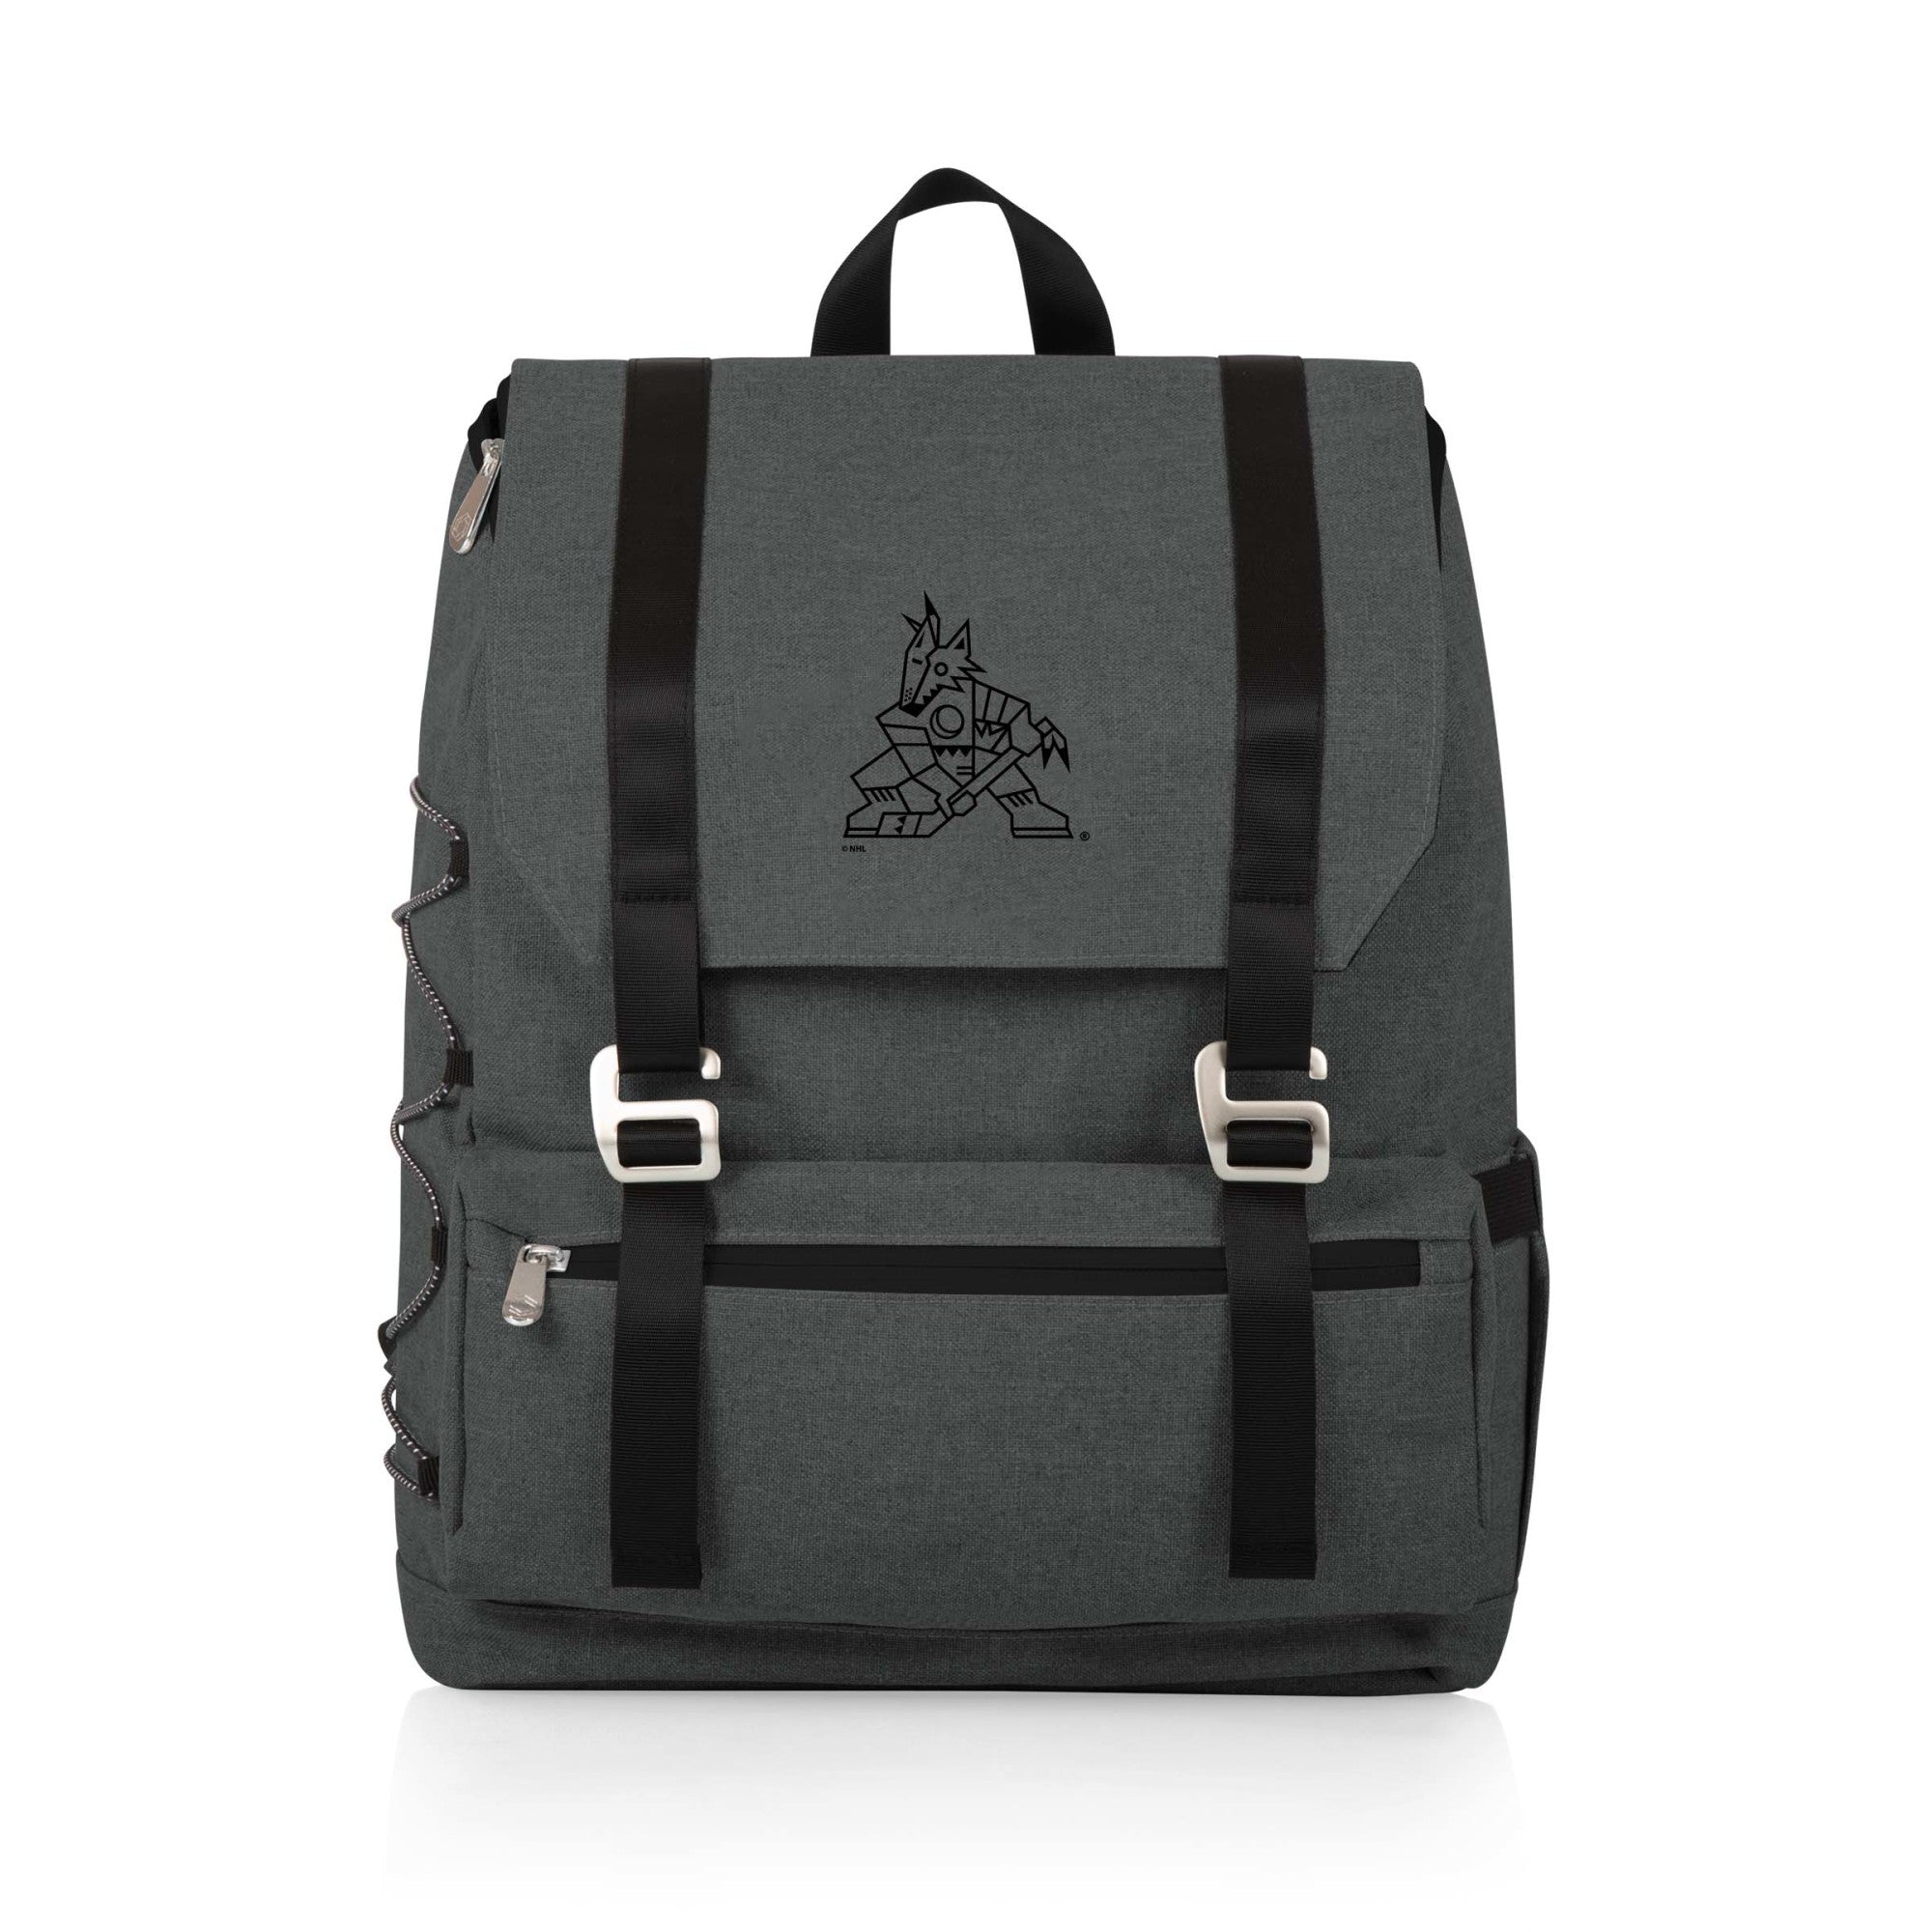 Arizona Coyotes - On The Go Traverse Backpack Cooler